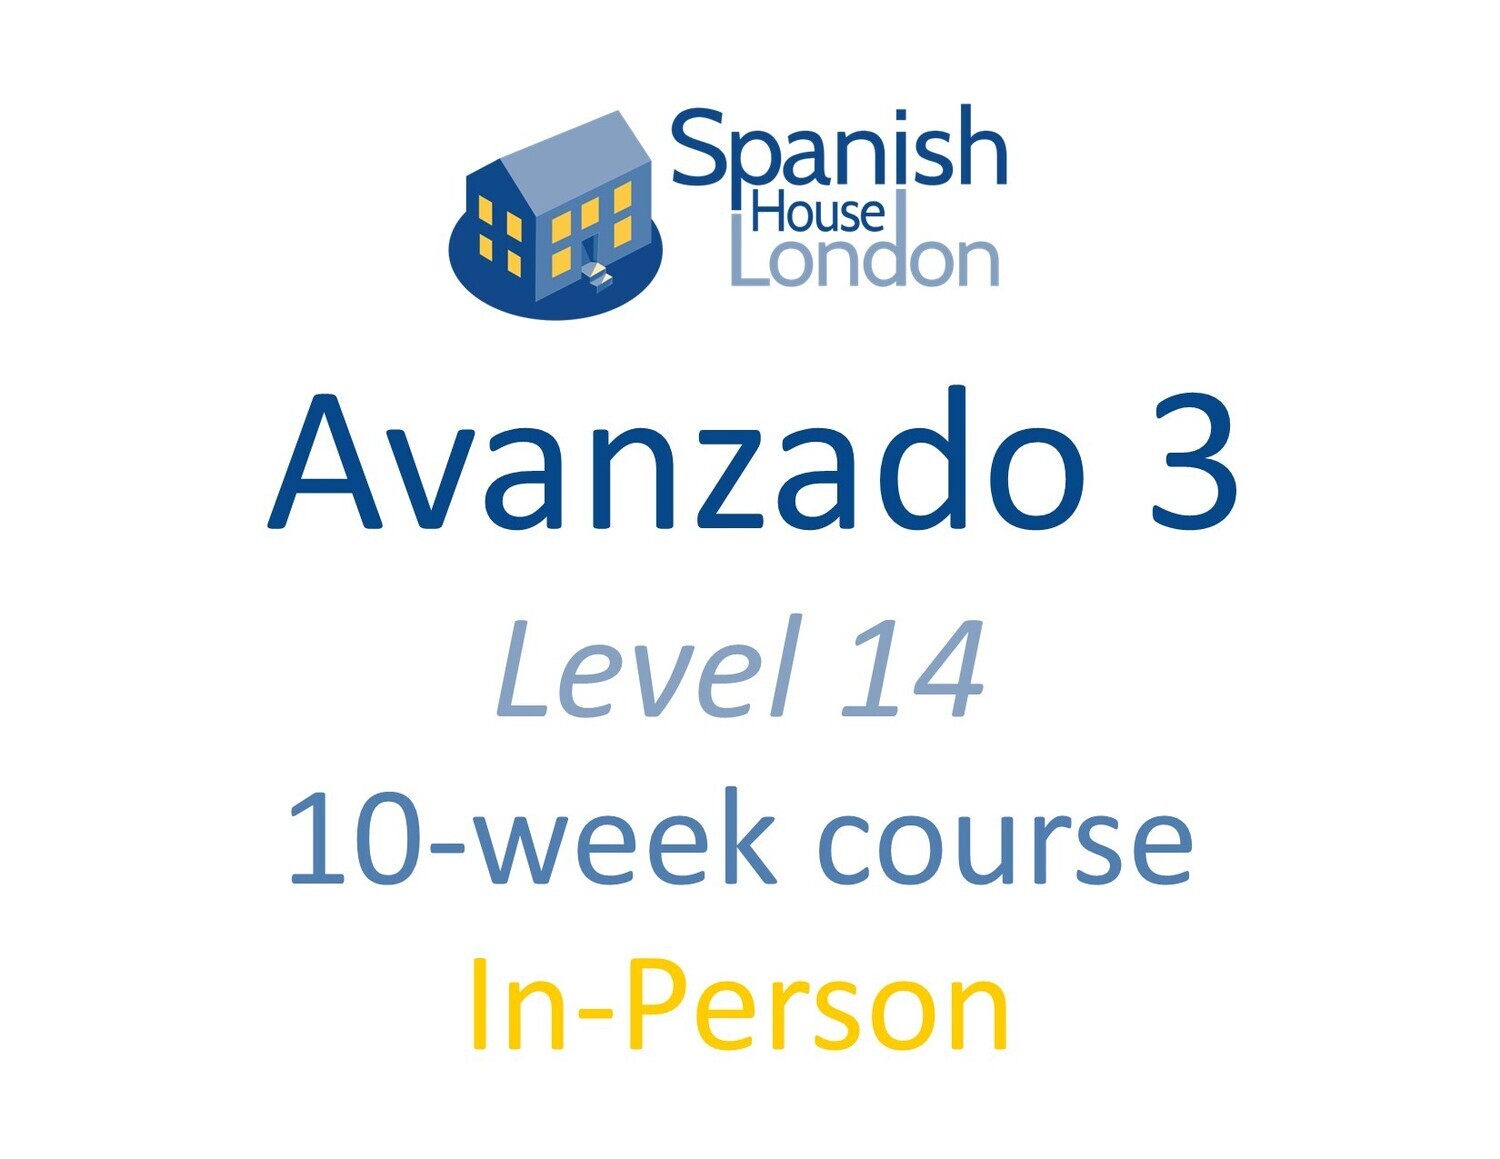 Avanzado 3 Course starting on 28th May at 6pm in Euston / King's Cross